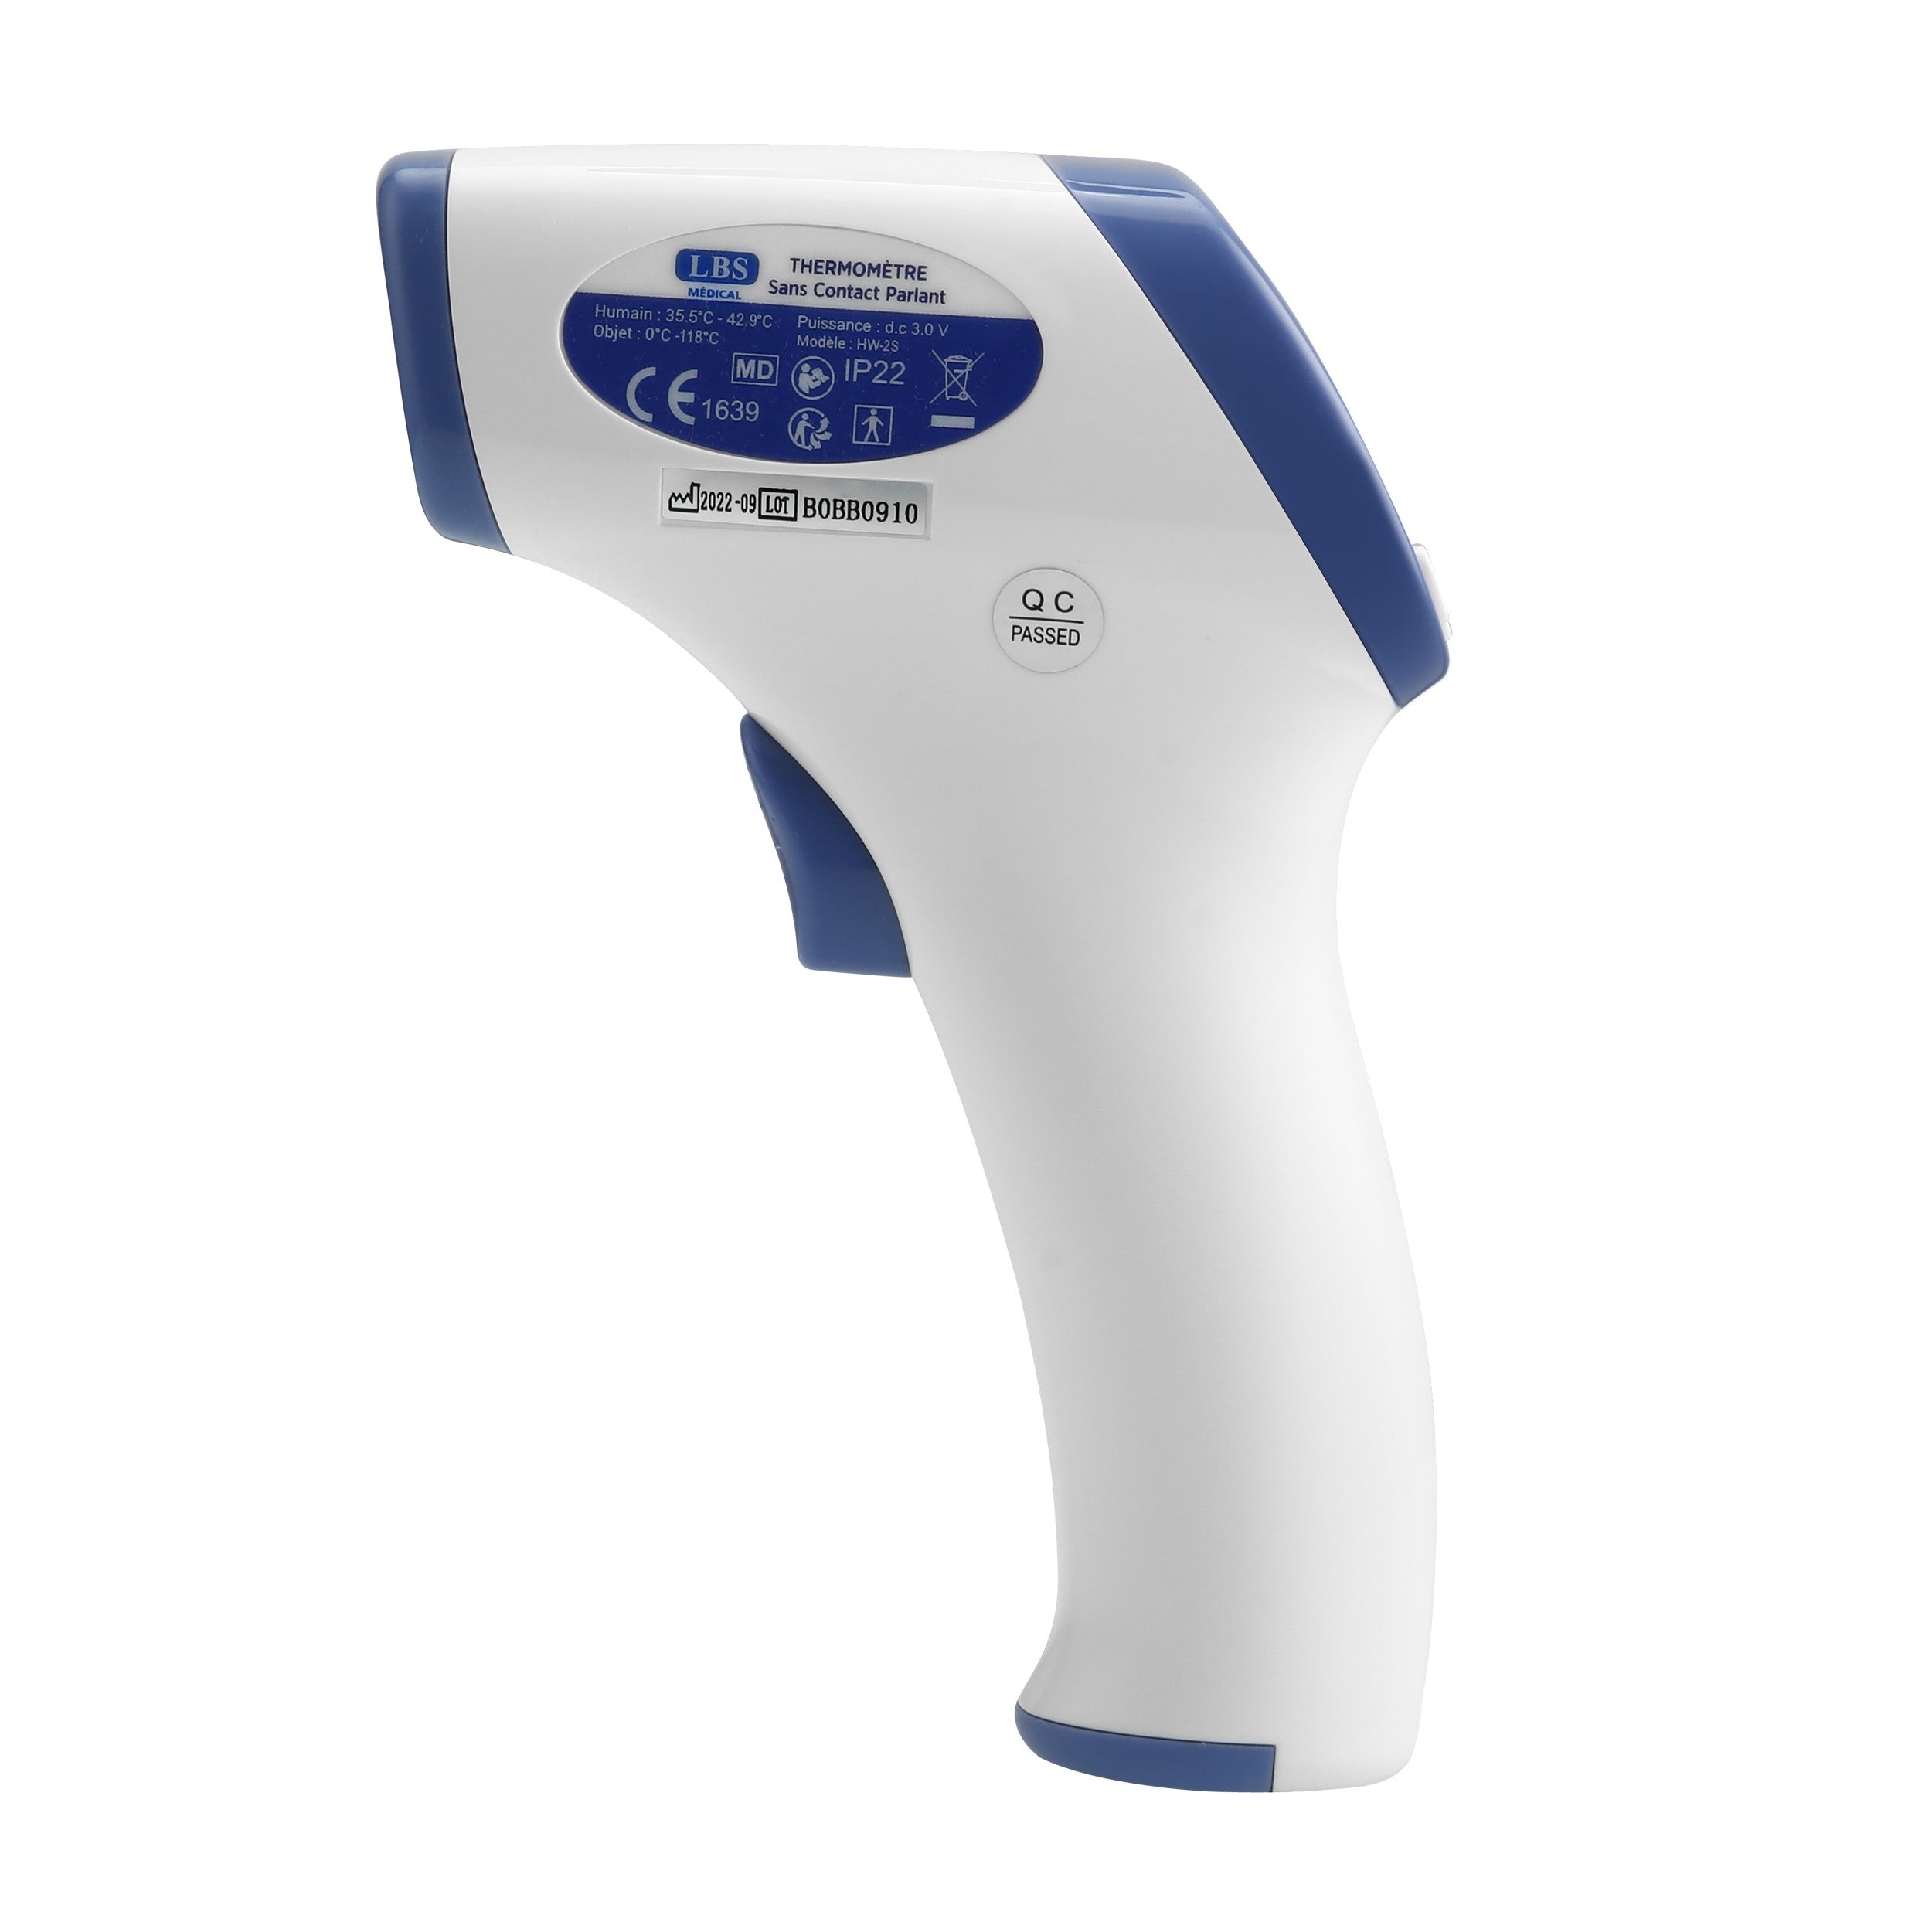 TALKING FOREHEAD THERMOMETER